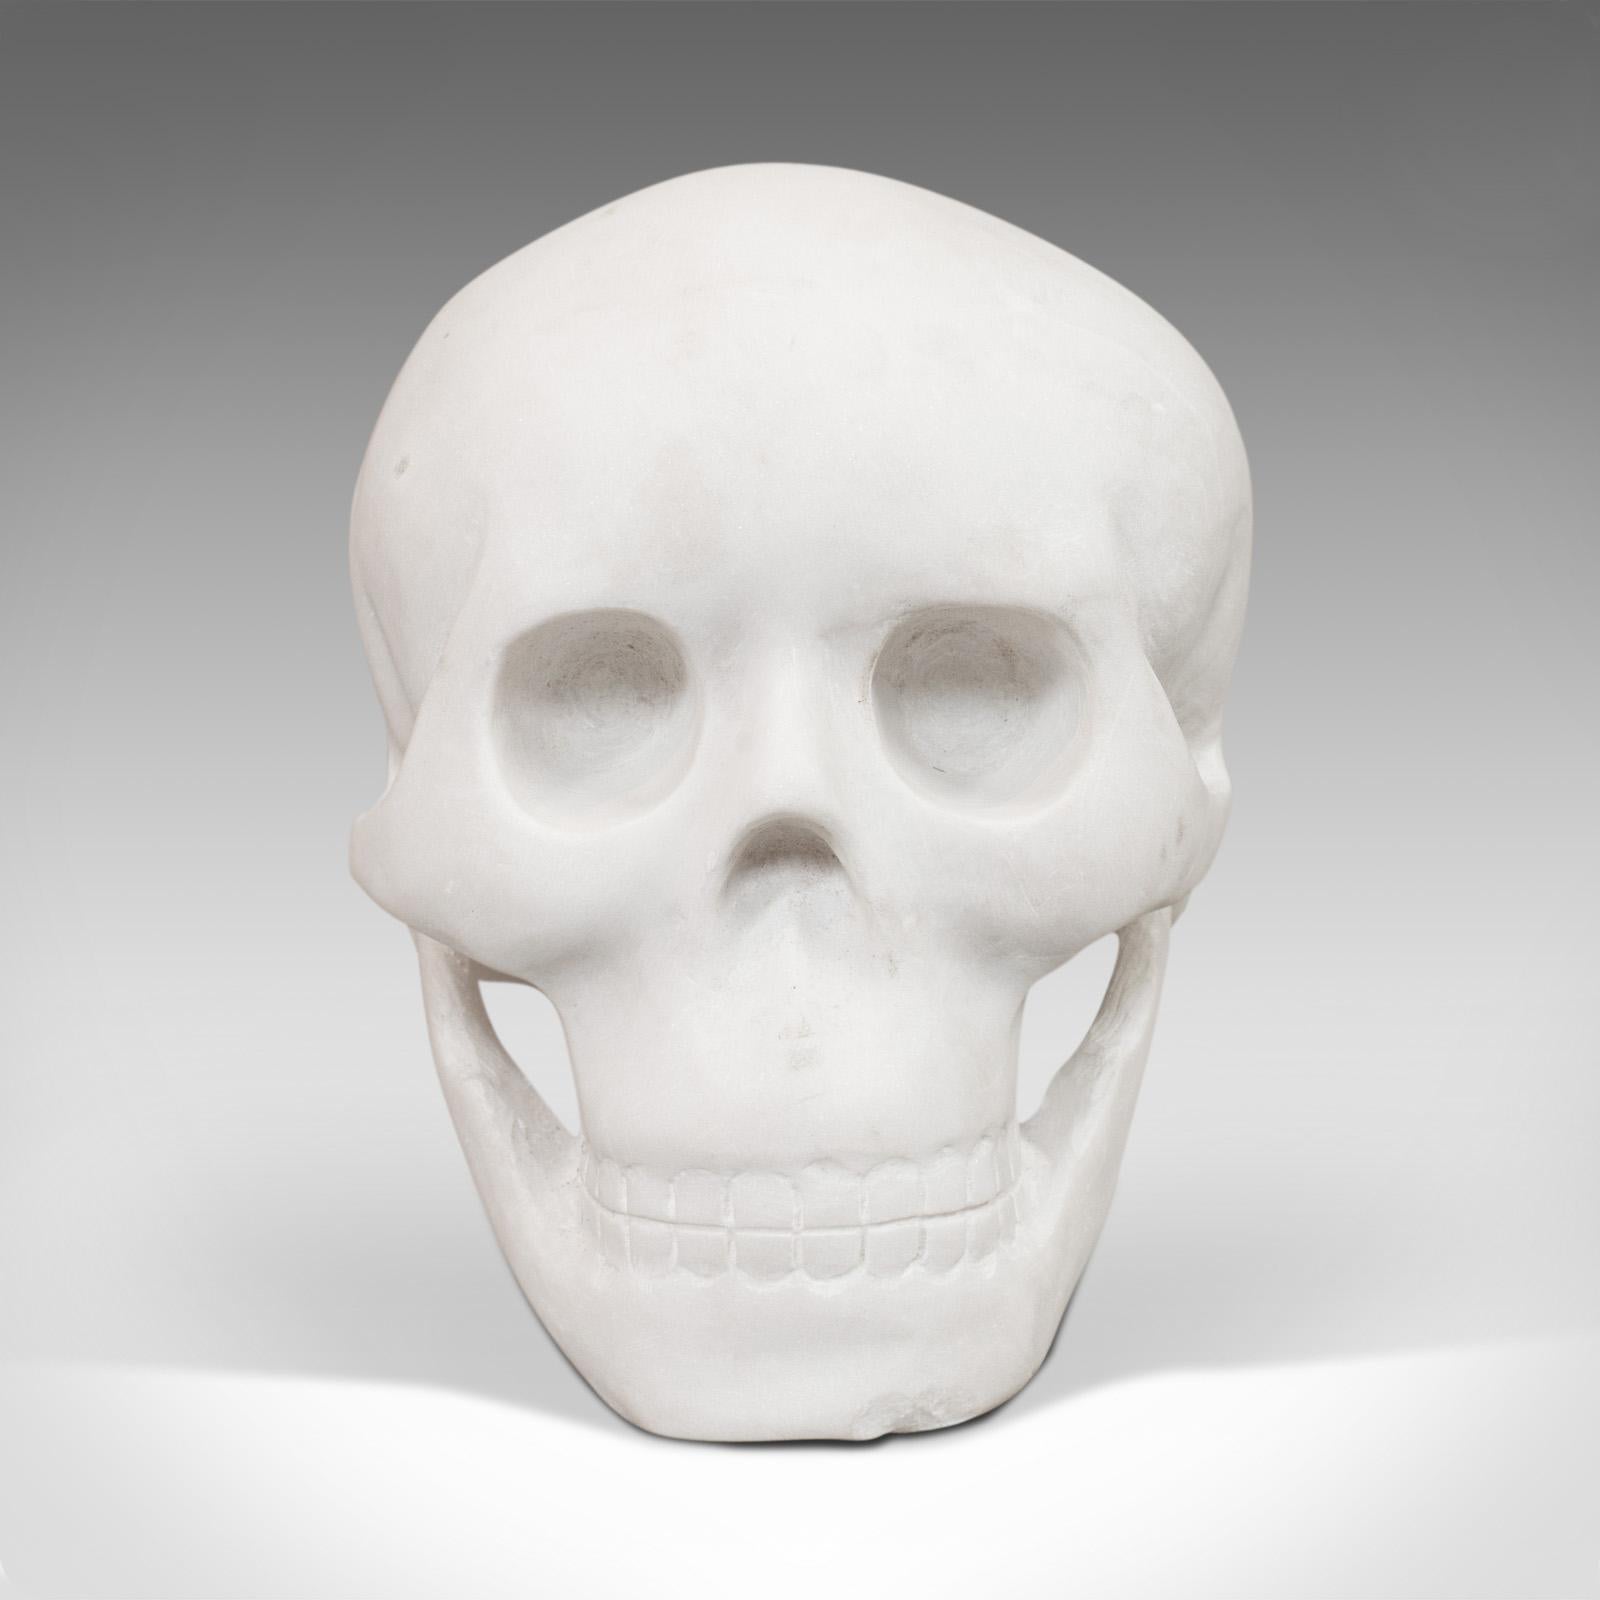 This is a vintage marble skull. An English, Bianco assoluto paperweight or ornamental study, dating to the late 20th century.

Add some macabre to your desk or bookcase
Displays a desirable aged patina - some marks visible under closer